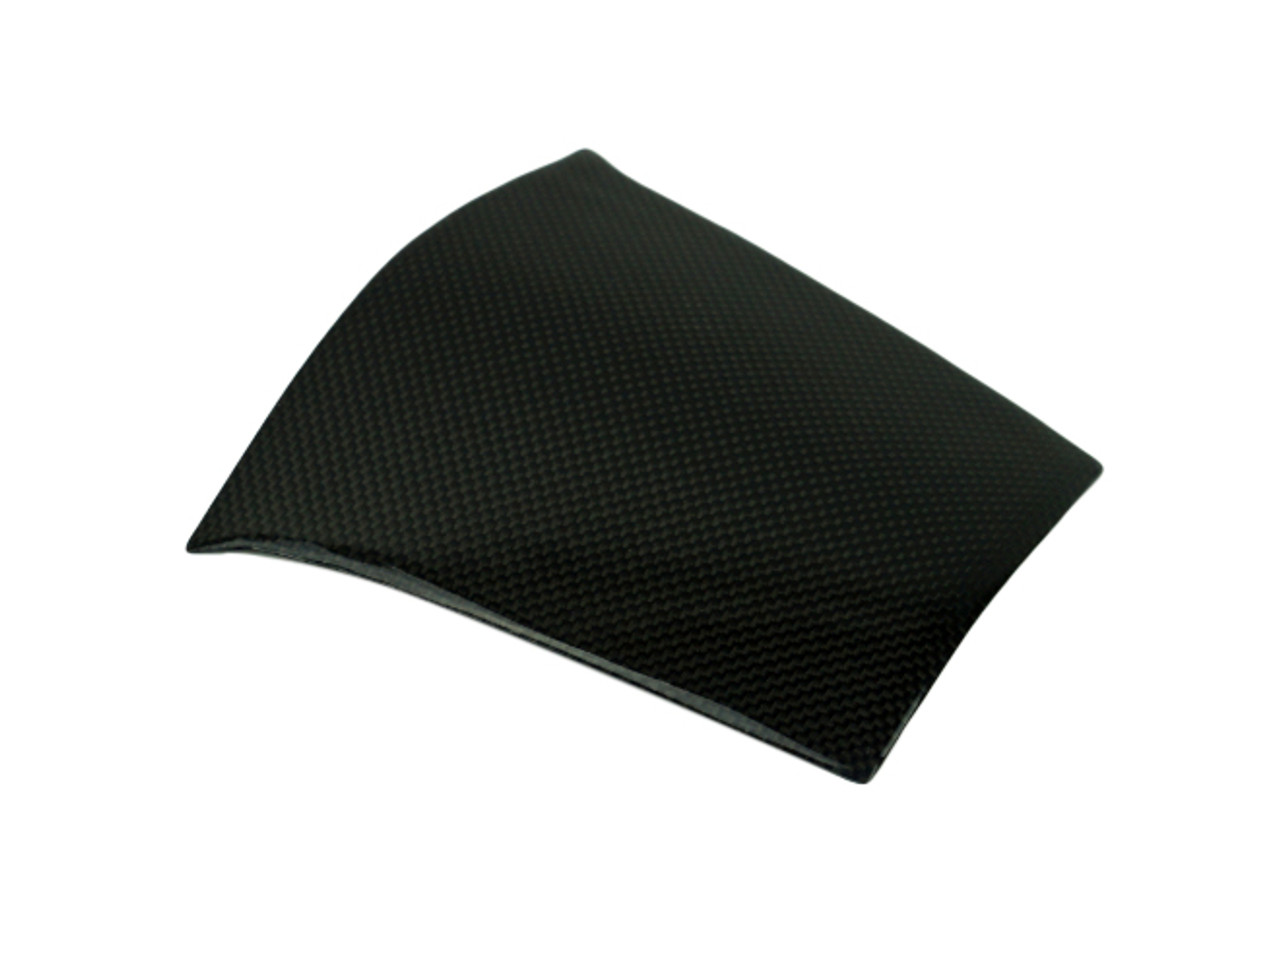 Tank Pad in Glossy Twill Weave Shown for KTM 1290 Super Duke R 2014-2019